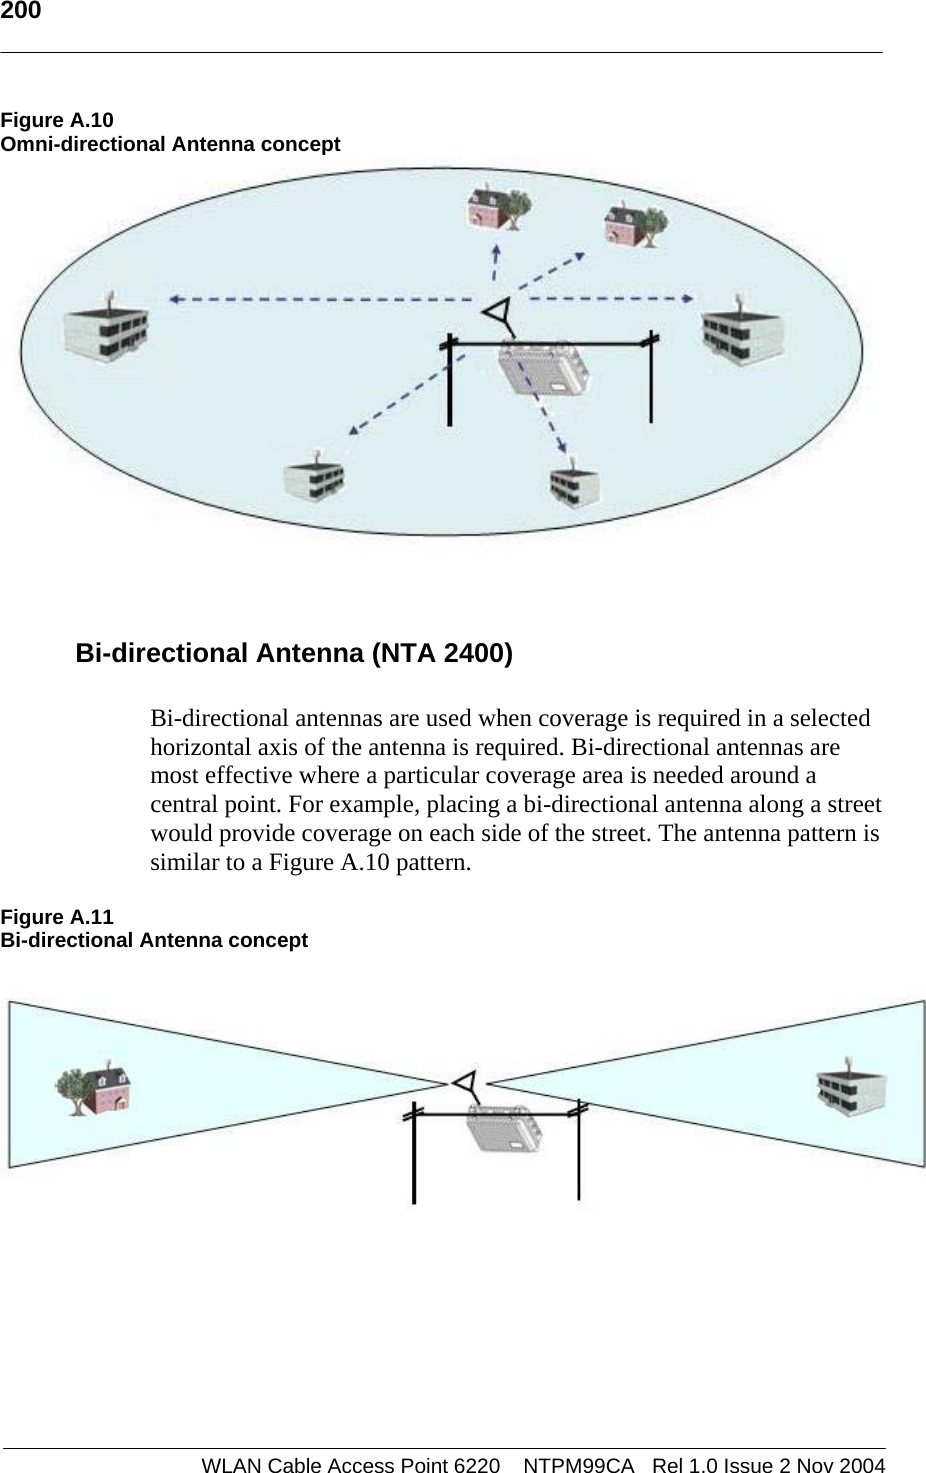   200   WLAN Cable Access Point 6220    NTPM99CA   Rel 1.0 Issue 2 Nov 2004 Figure A.10 Omni-directional Antenna concept   Bi-directional Antenna (NTA 2400)  Bi-directional antennas are used when coverage is required in a selected horizontal axis of the antenna is required. Bi-directional antennas are most effective where a particular coverage area is needed around a central point. For example, placing a bi-directional antenna along a street would provide coverage on each side of the street. The antenna pattern is similar to a Figure A.10 pattern.  Figure A.11 Bi-directional Antenna concept         